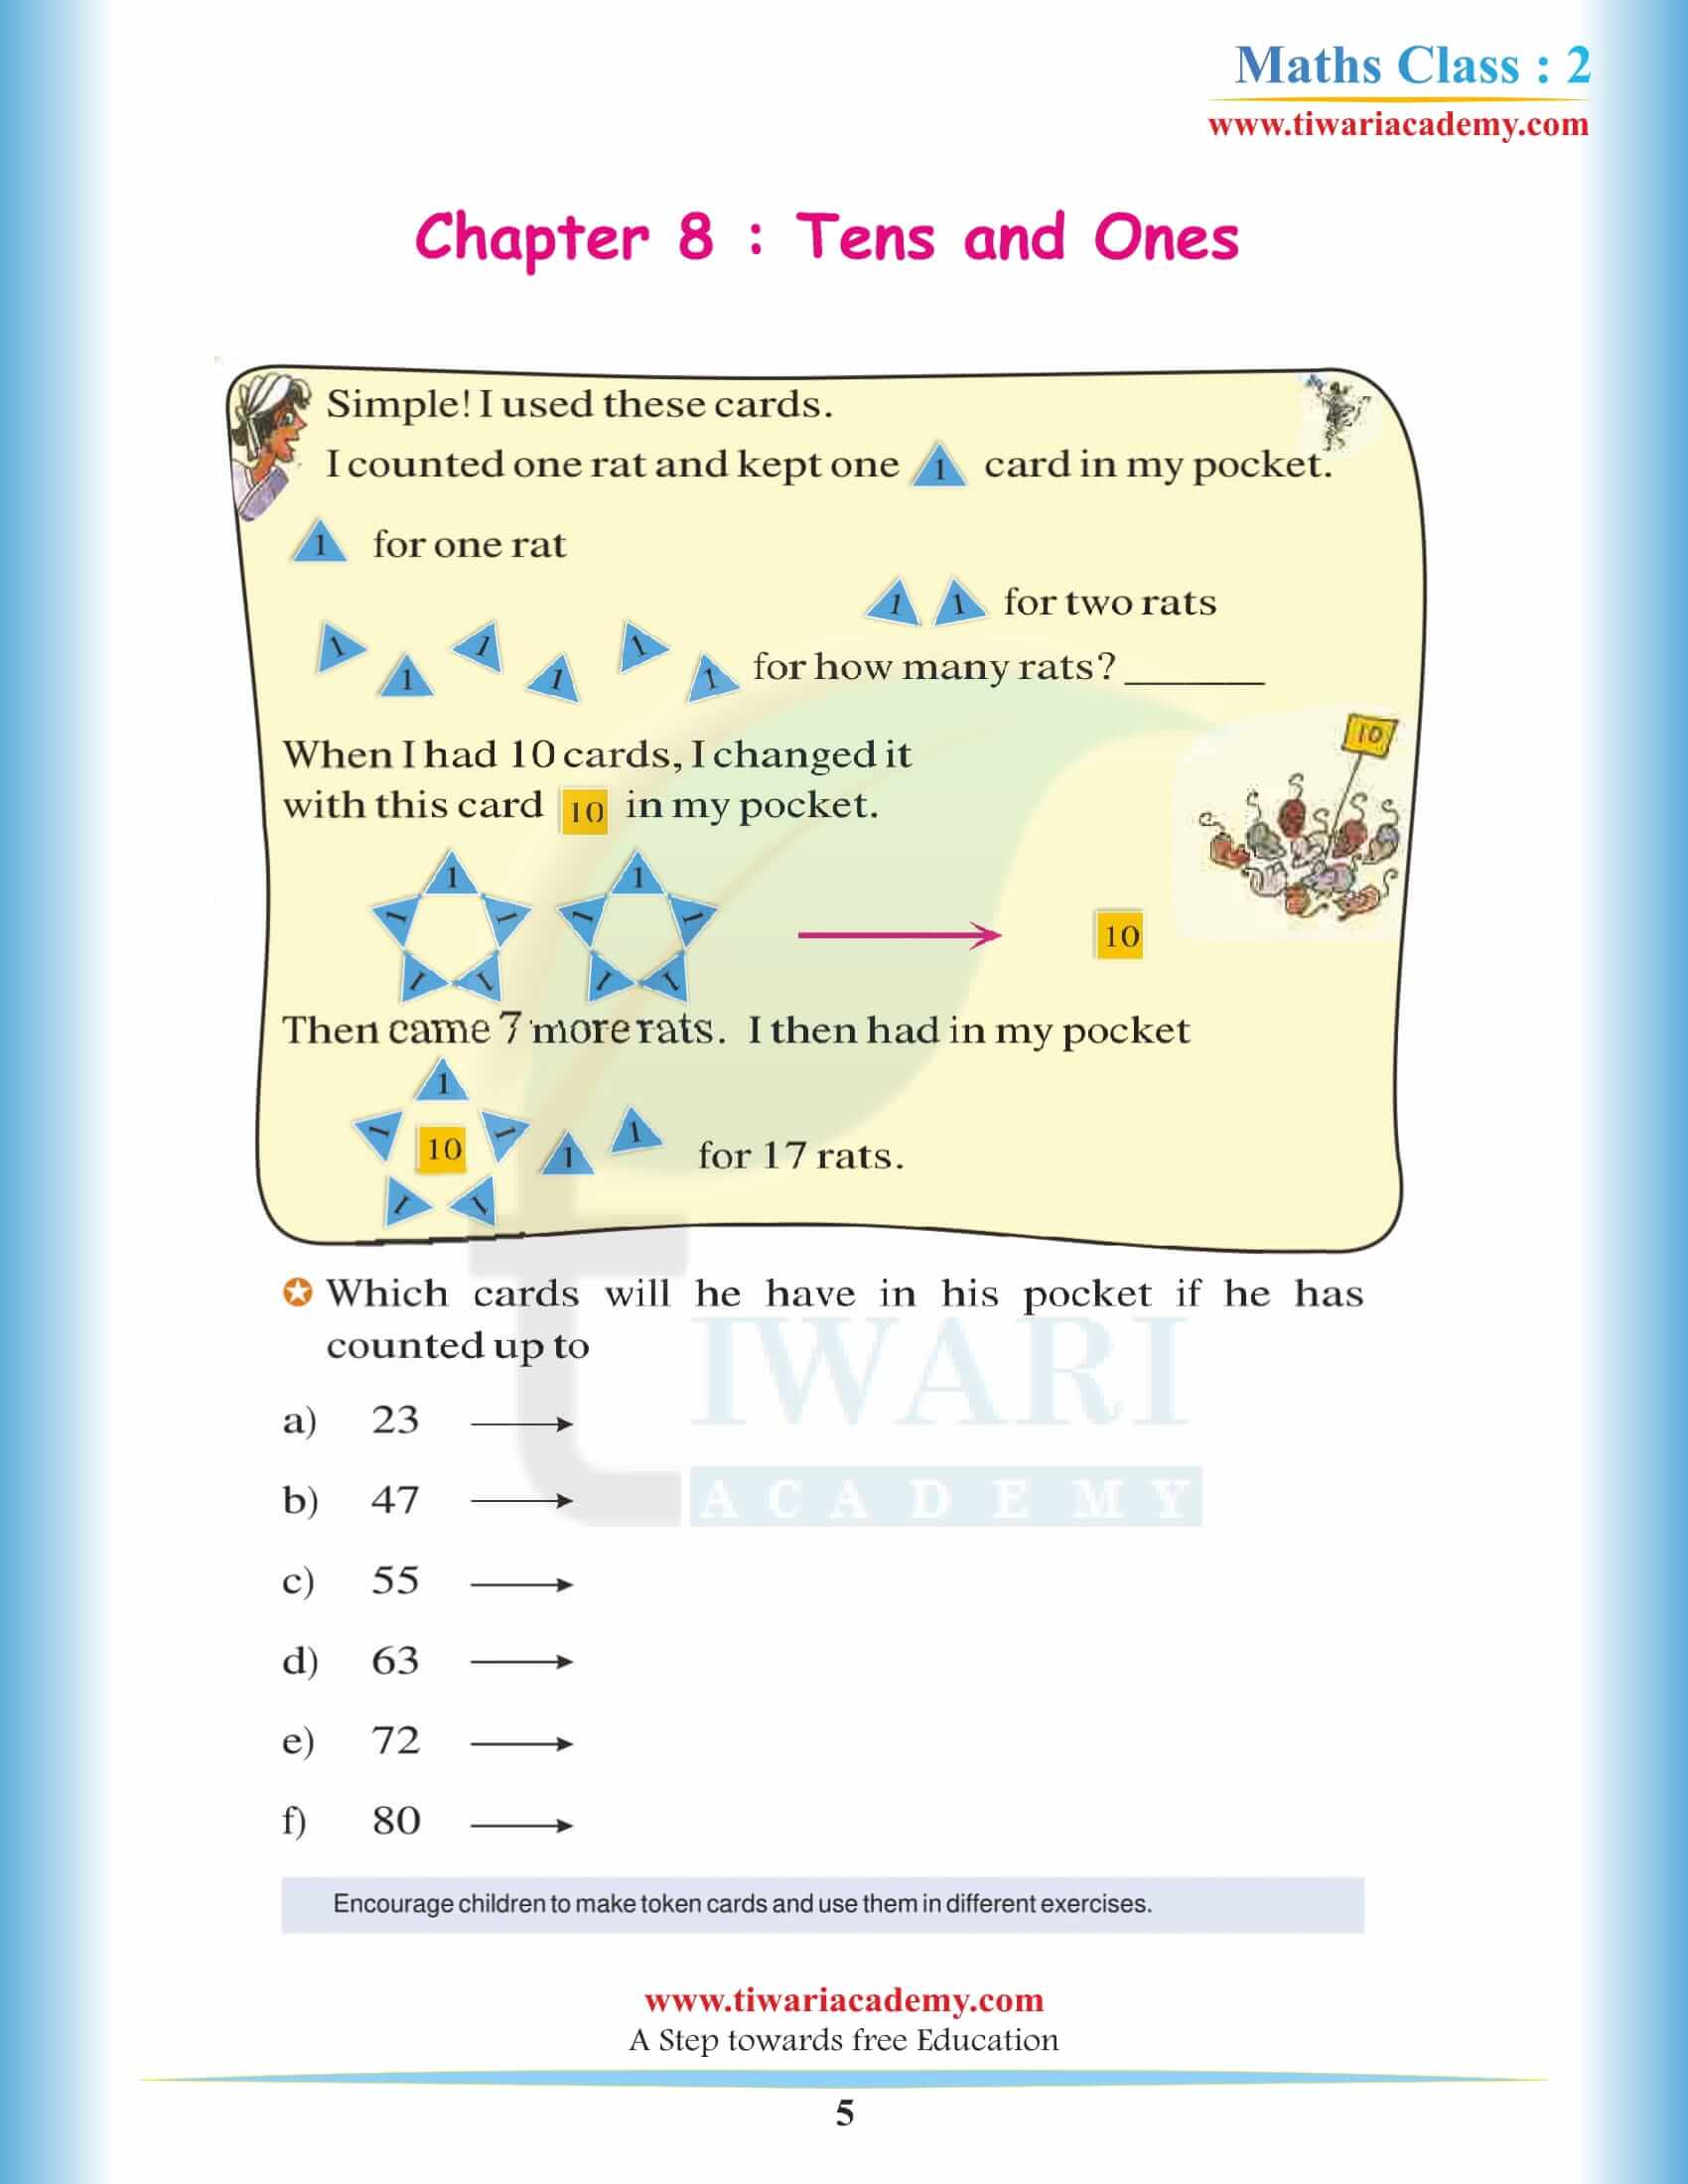 NCERT Solutions for Class 2 Maths Chapter 8 in English Medium